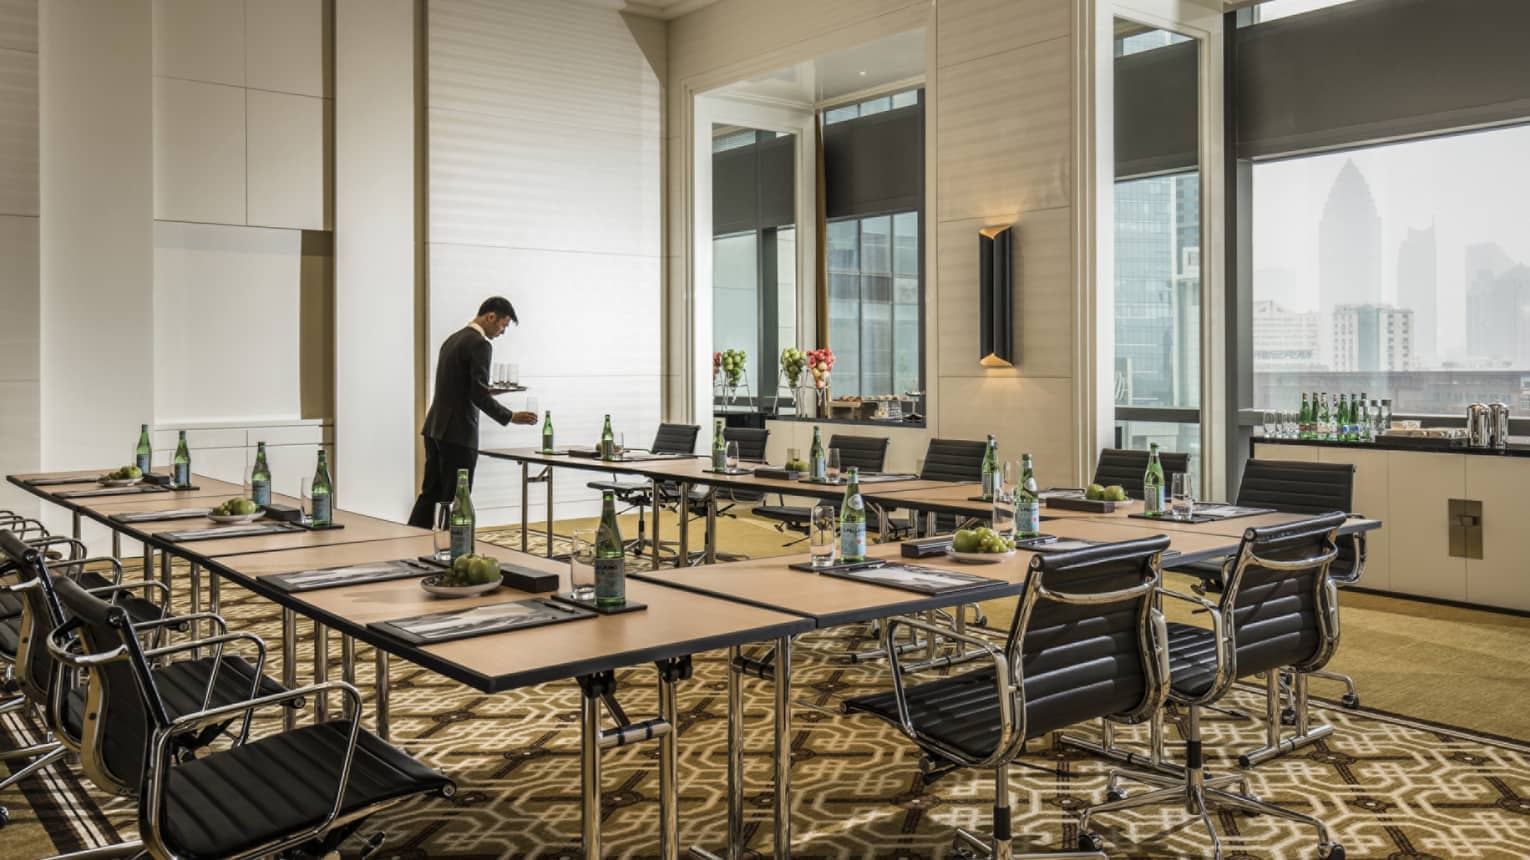 Hotel staff sets water glasses on modular meeting table near windows